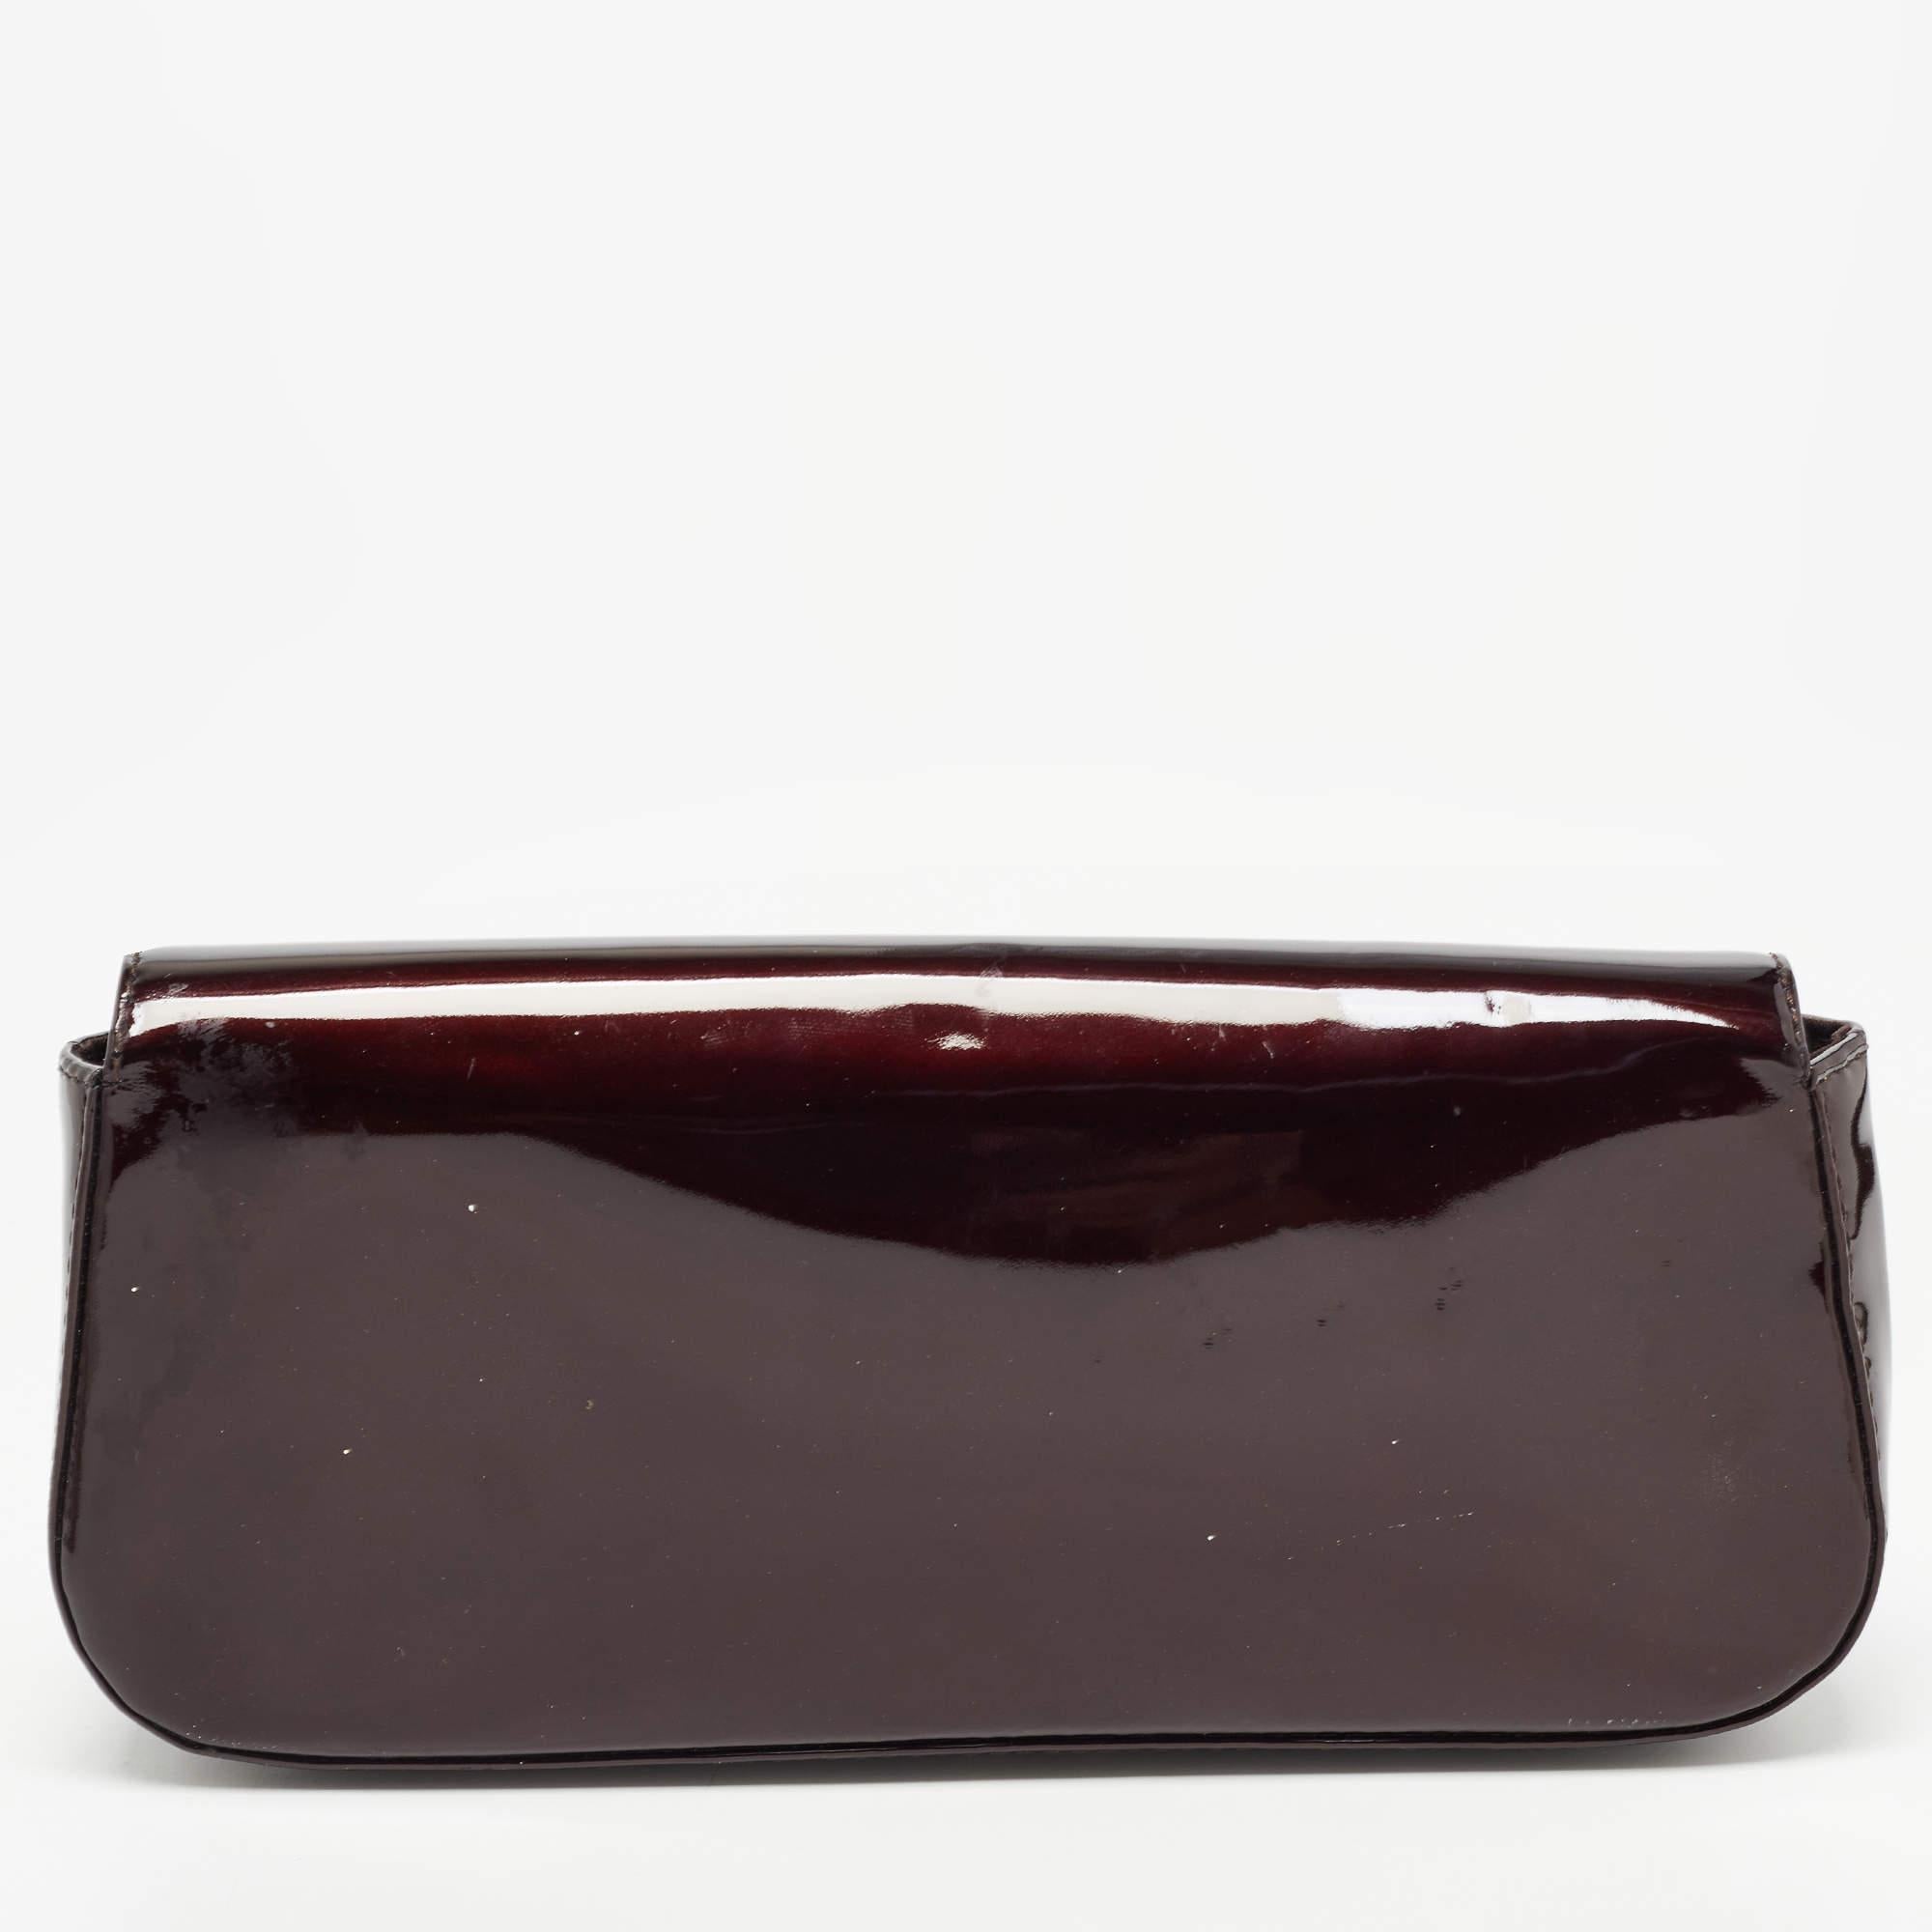 Well-crafted and overflowing with style, this Sobe clutch is from Louis Vuitton. It has a patent leather exterior, a fabric interior, and a large LV adorned on the flap. This creation will lift all your gowns and elegant outfits.

Includes: Original